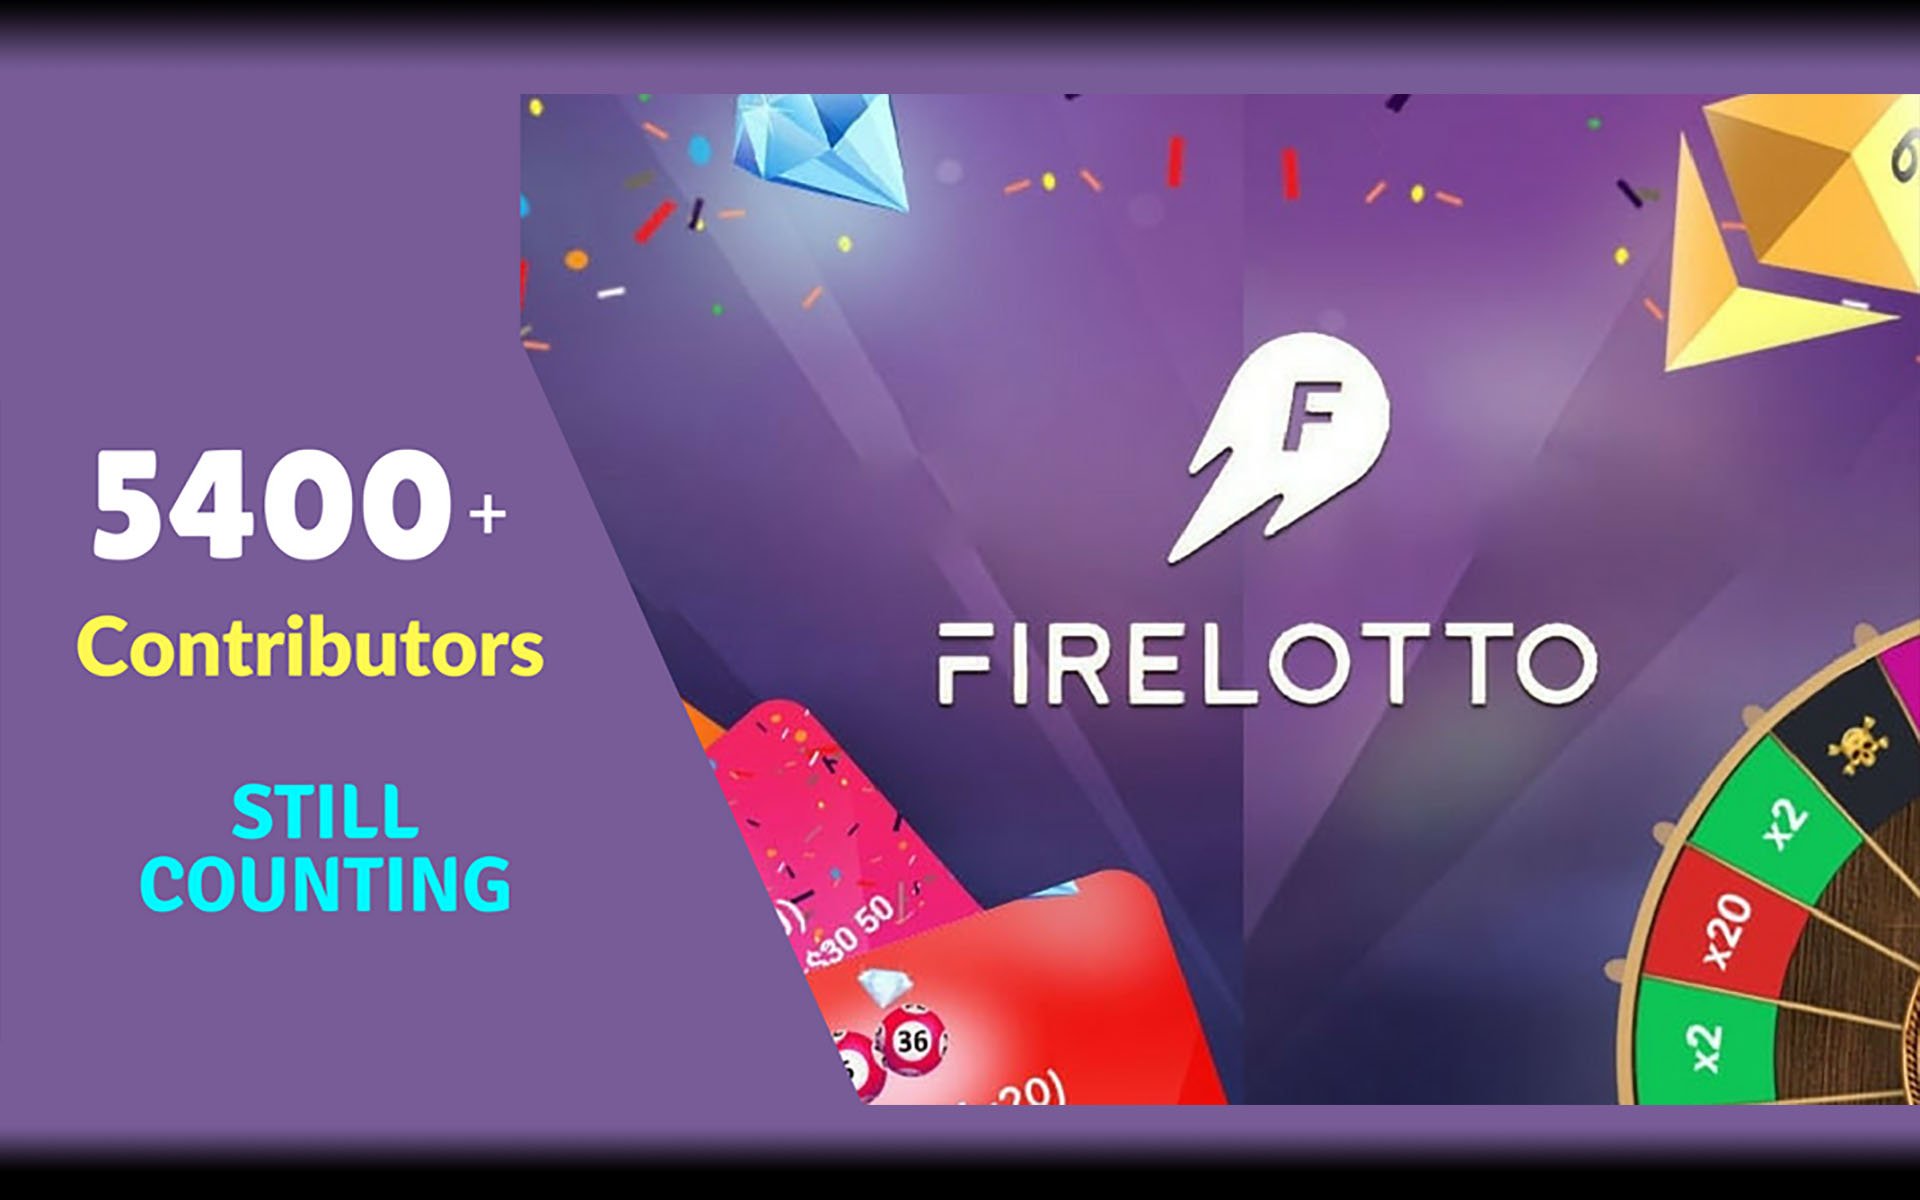 FireLotto Crypto Lottery ICO Is In Full Swing With 5400+ Contributors